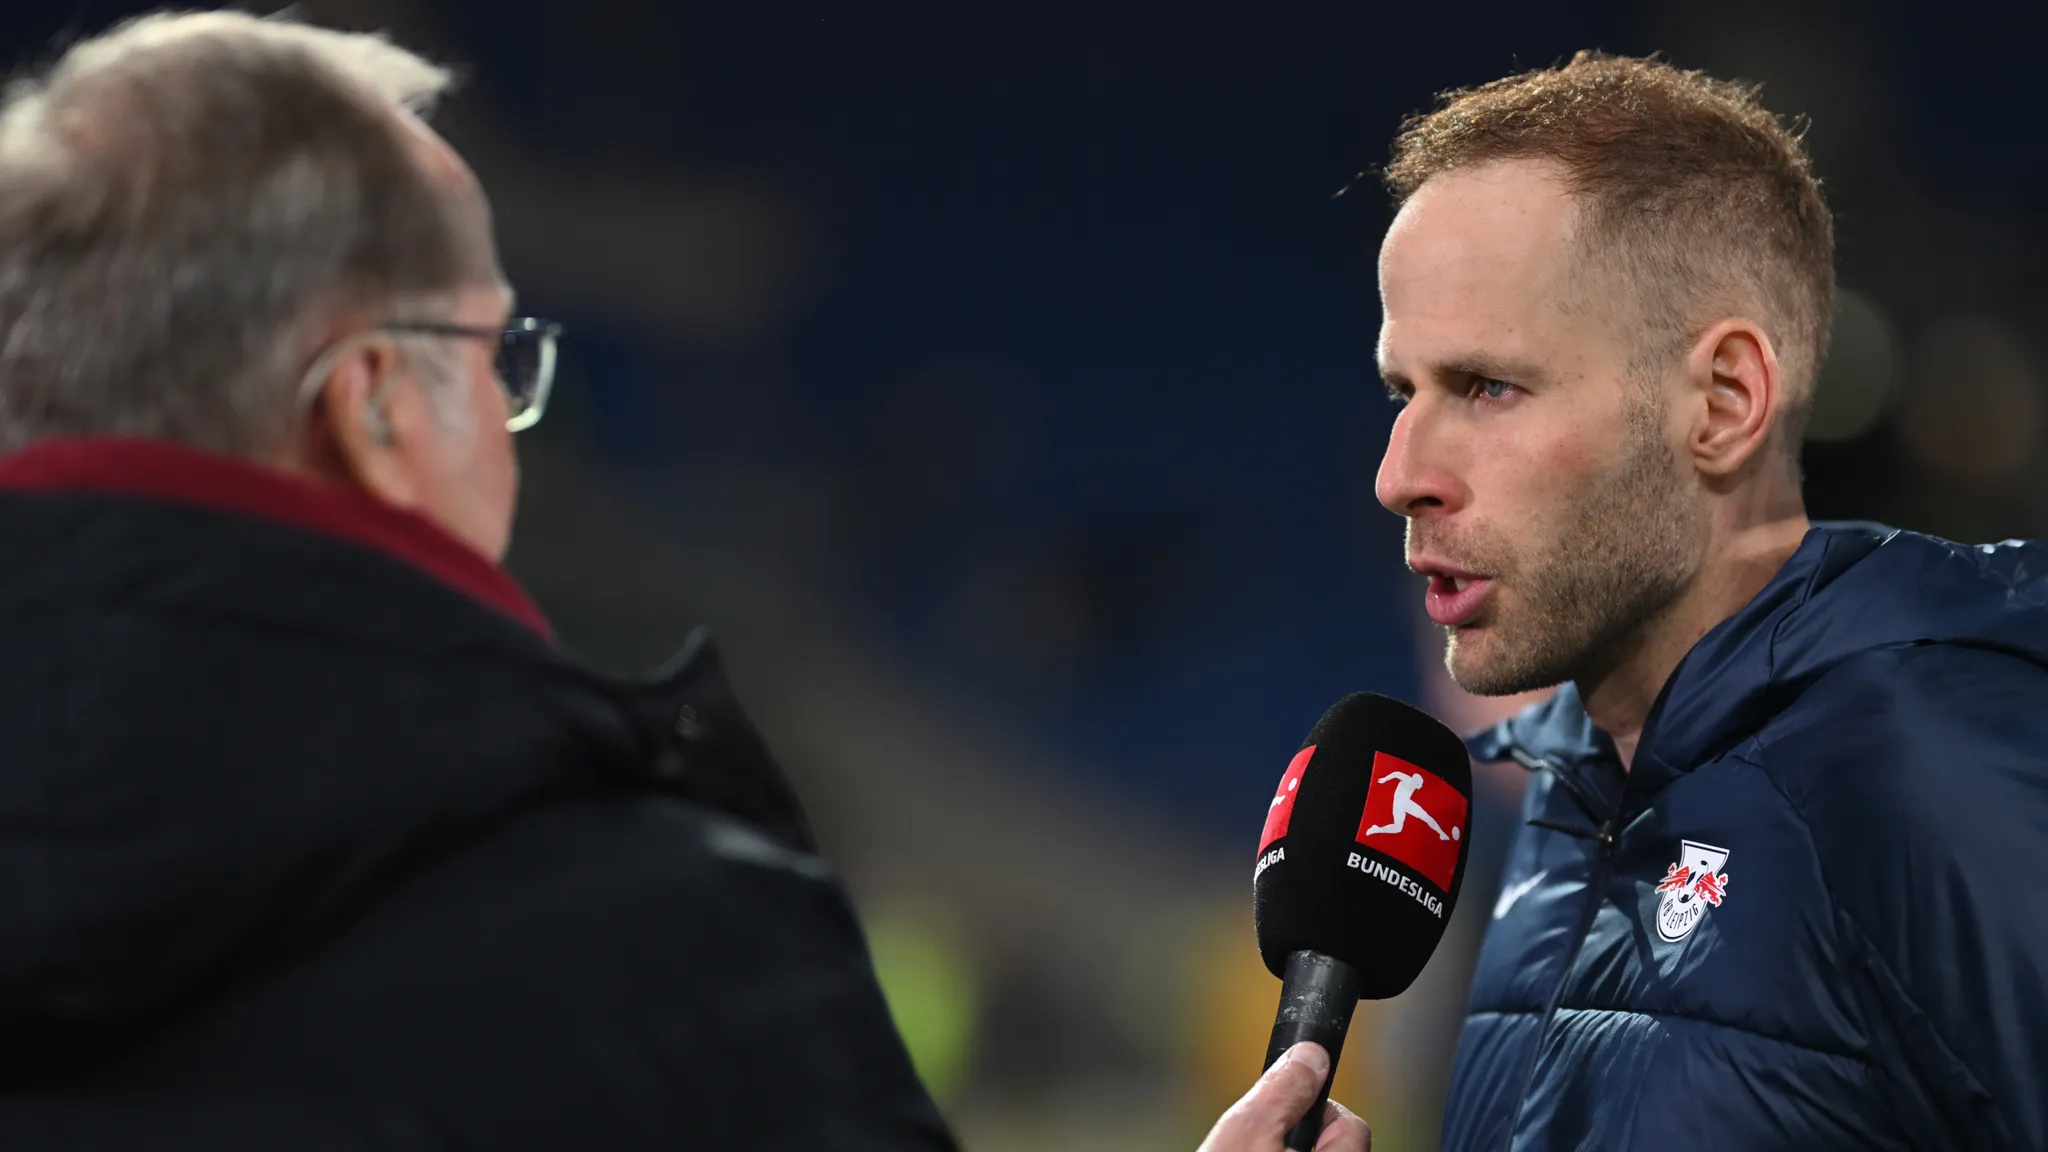 Goalkeeper Peter Gulacsi in an interview on DAZN after the game.